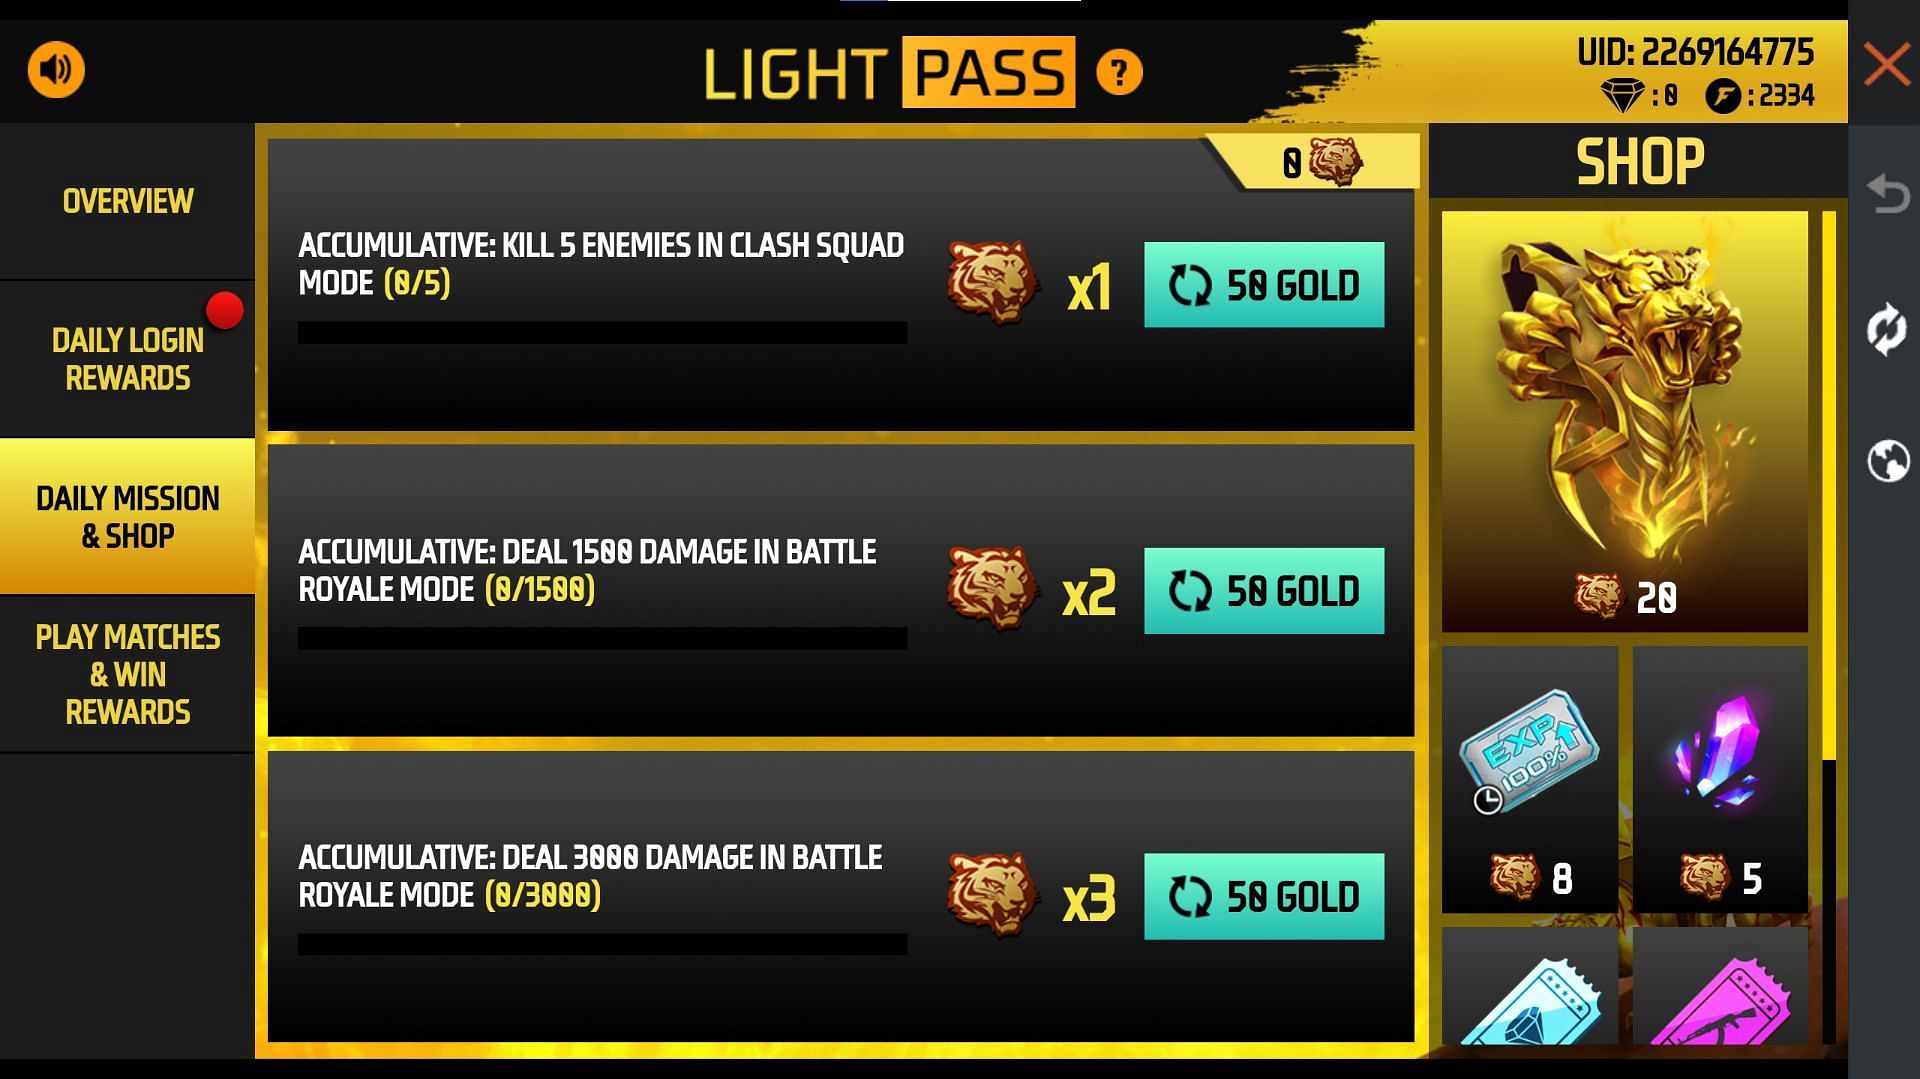 Exchange 20x Light Tokens in Free Fire MAX to get the Backpack skin (Image via Garena)